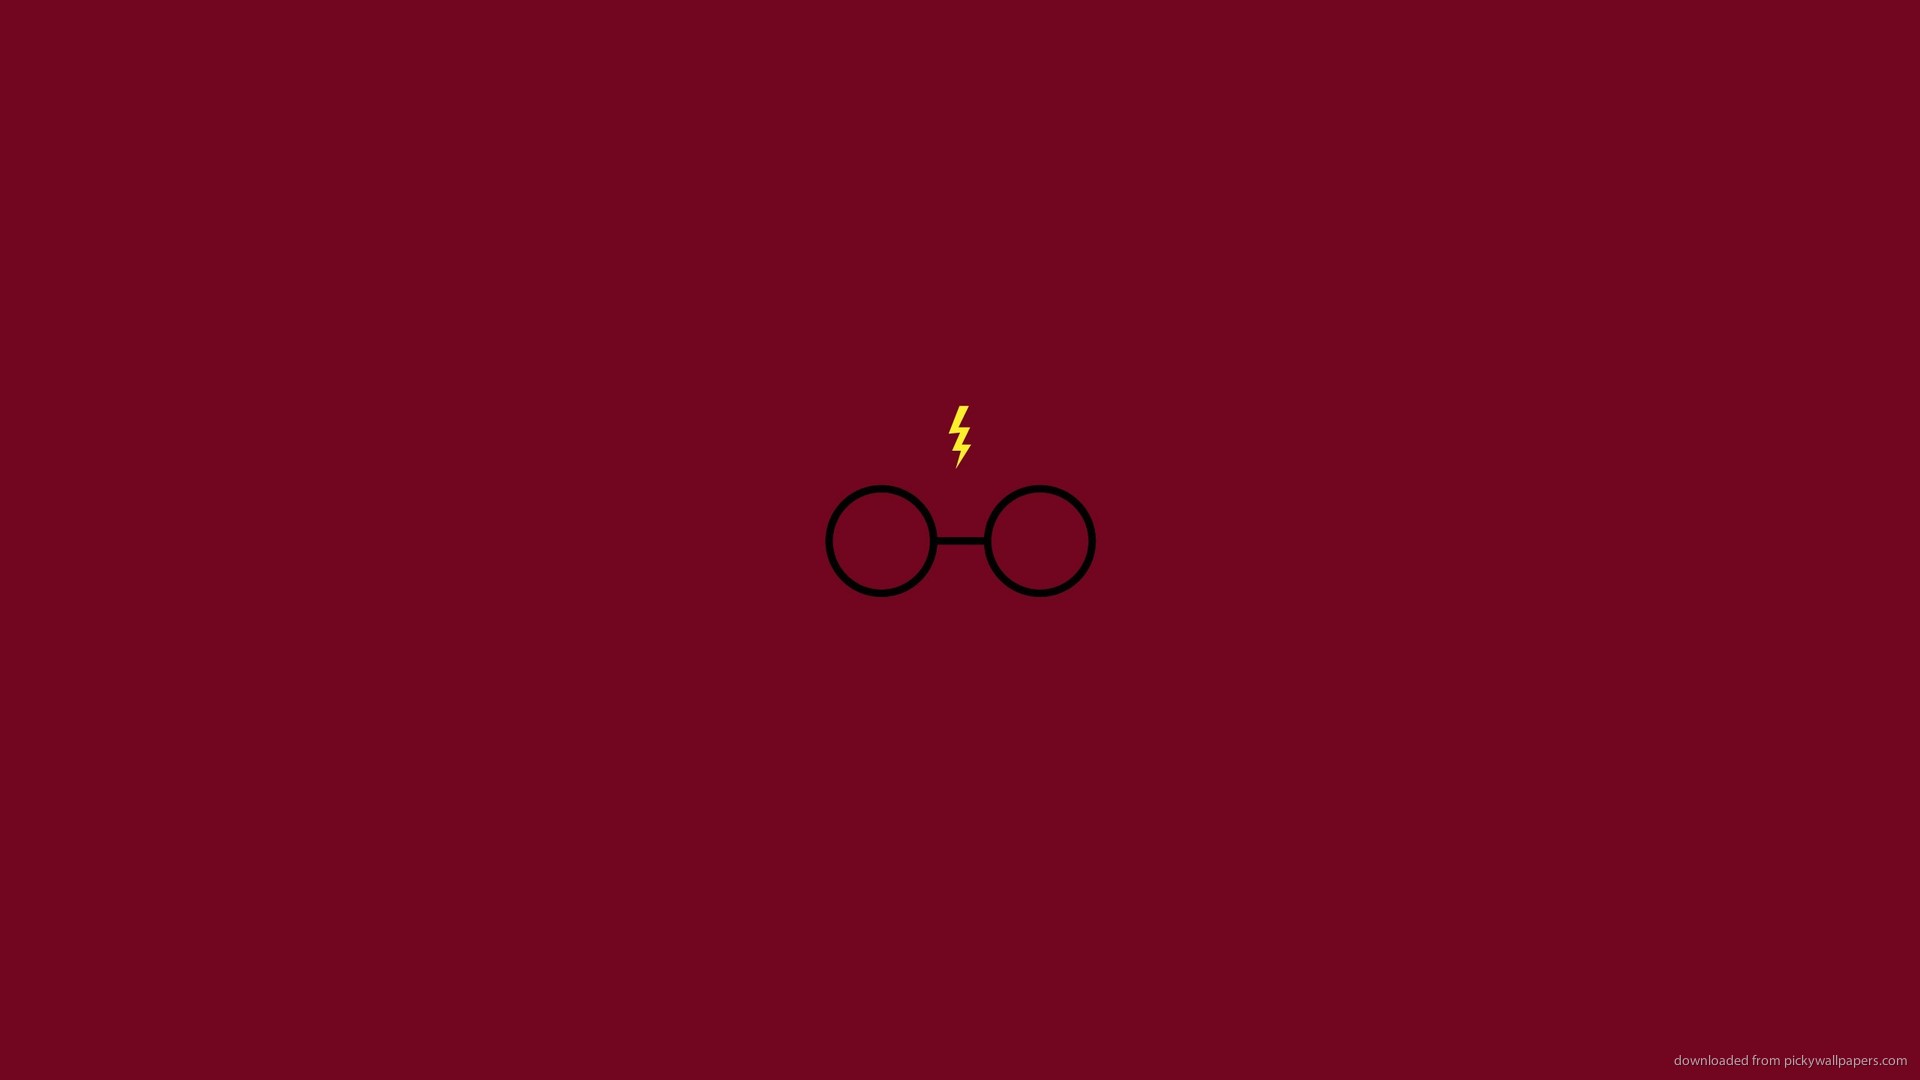 Minimalistic Harry Potter Wallpaper For iPhone